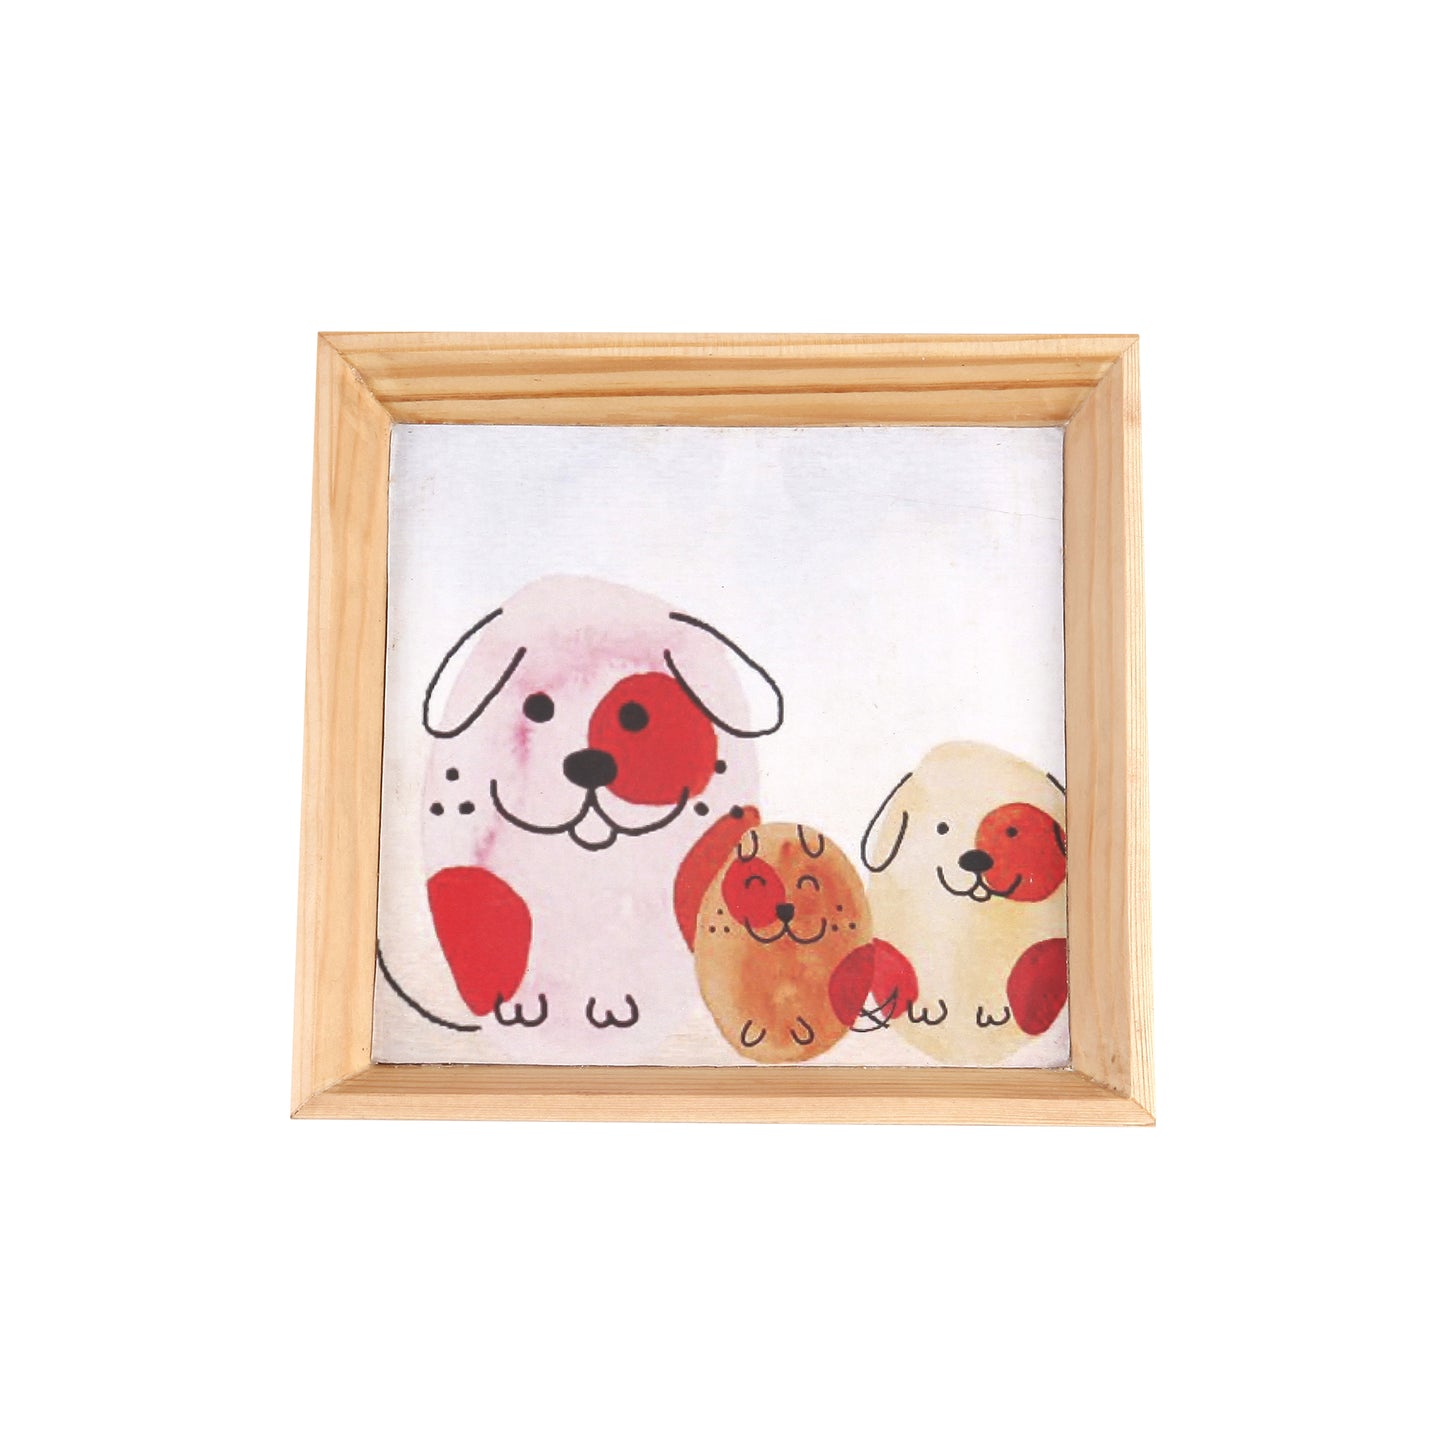 A Tiny Mistake Happy Dogs Small Square Wooden Serving Tray, 18 x 18 x 2 cm